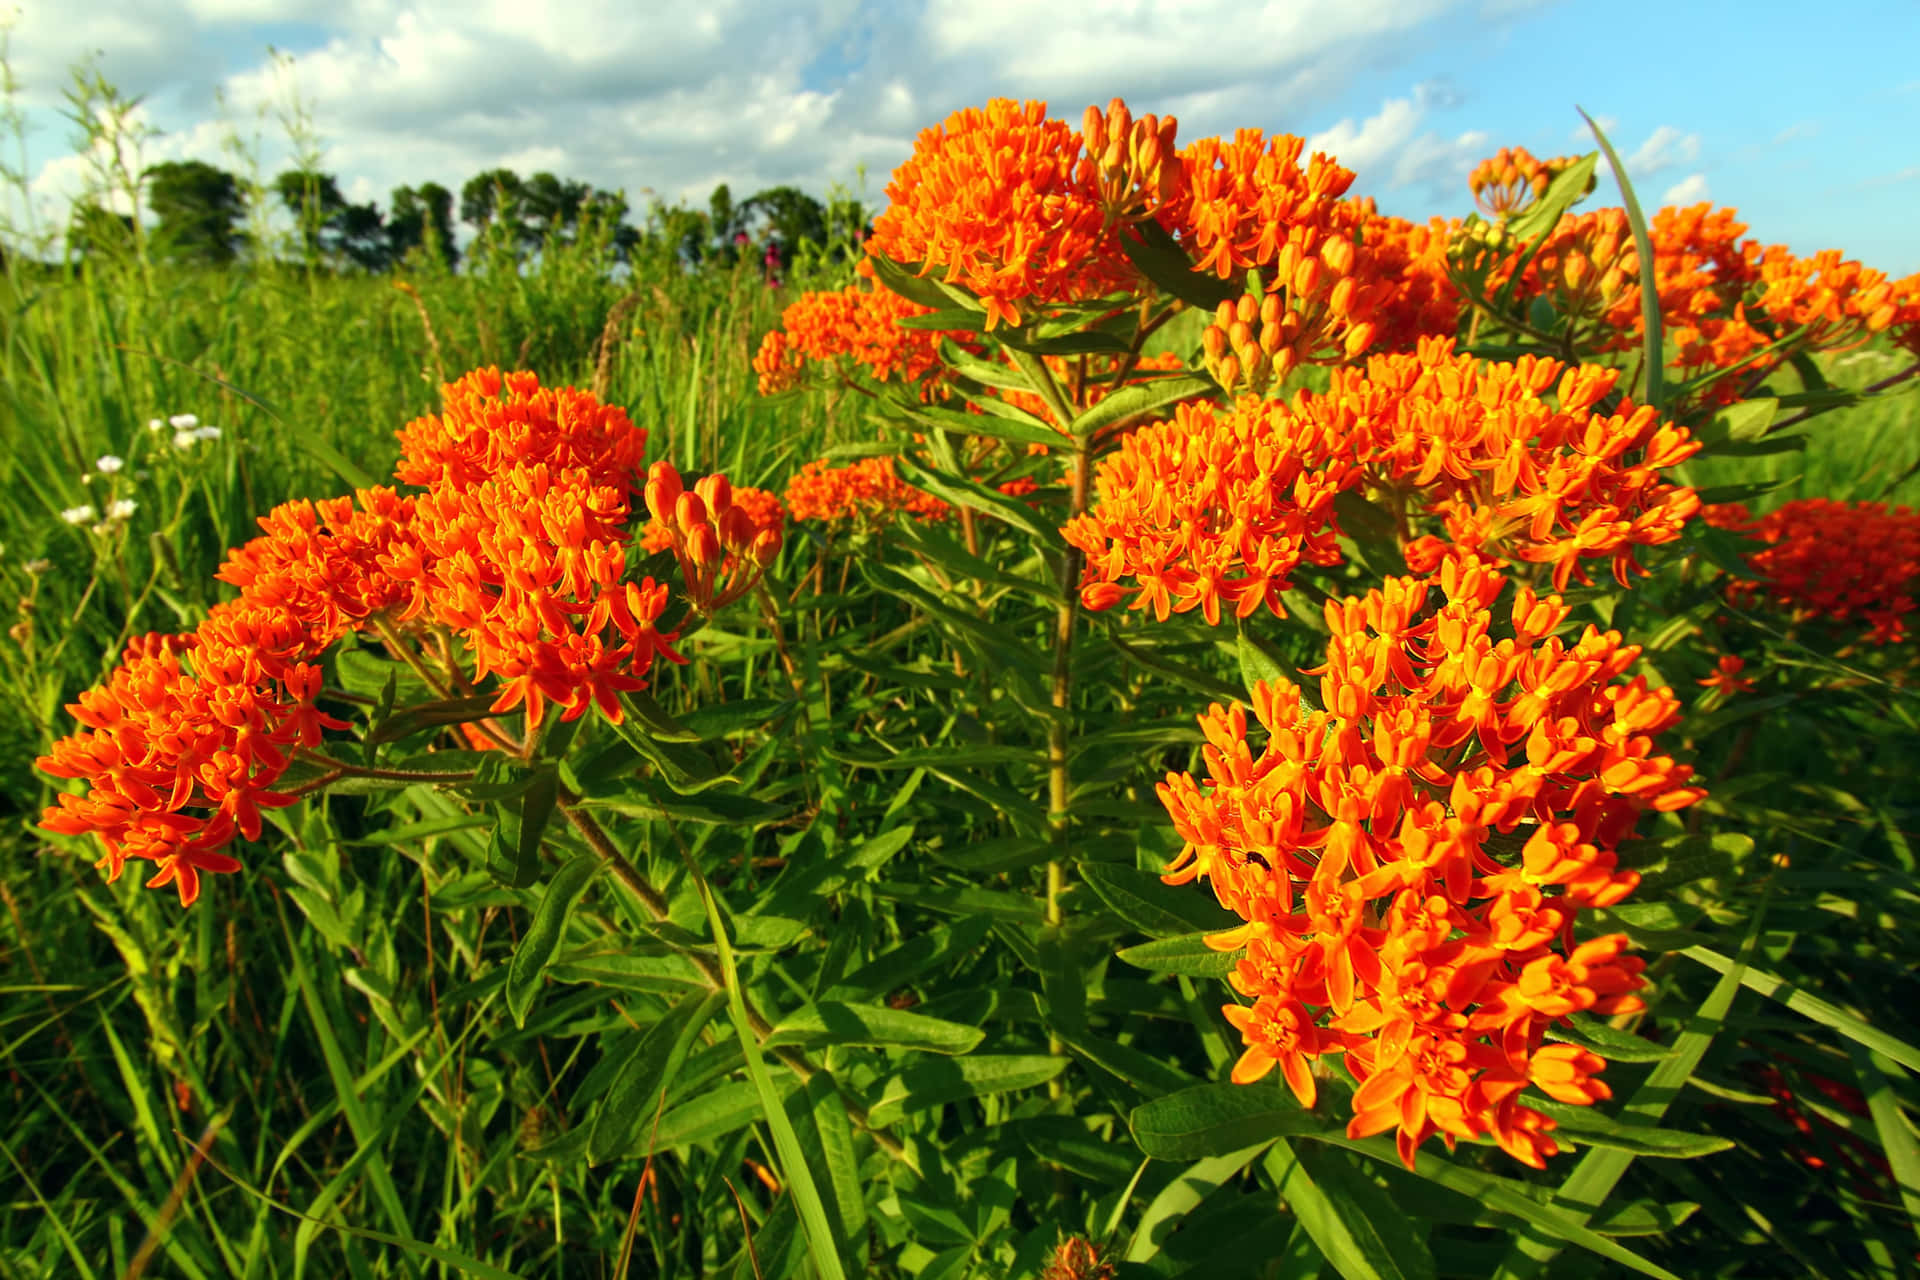 Wild and beautiful butterfly weed in all its bright colors left untouched in nature. Wallpaper